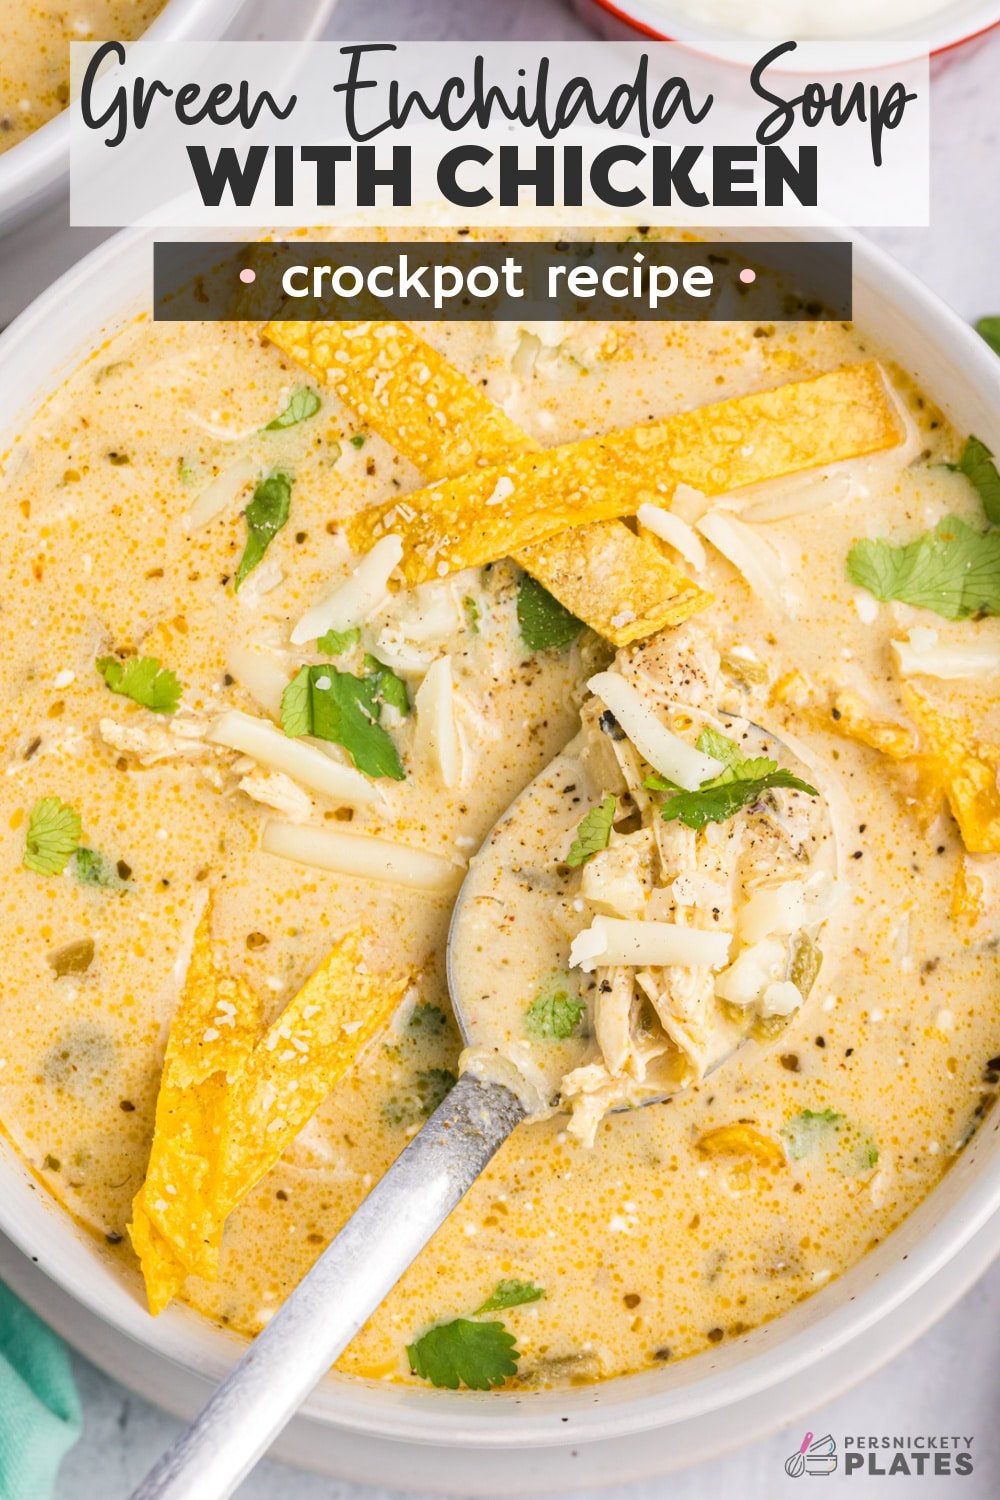 Slow Cooker Green Enchilada Soup takes everything you love about salsa verde chicken enchiladas and puts it in soup form. It's especially easy because it's a crock pot recipe! www.persnicketyplates.com